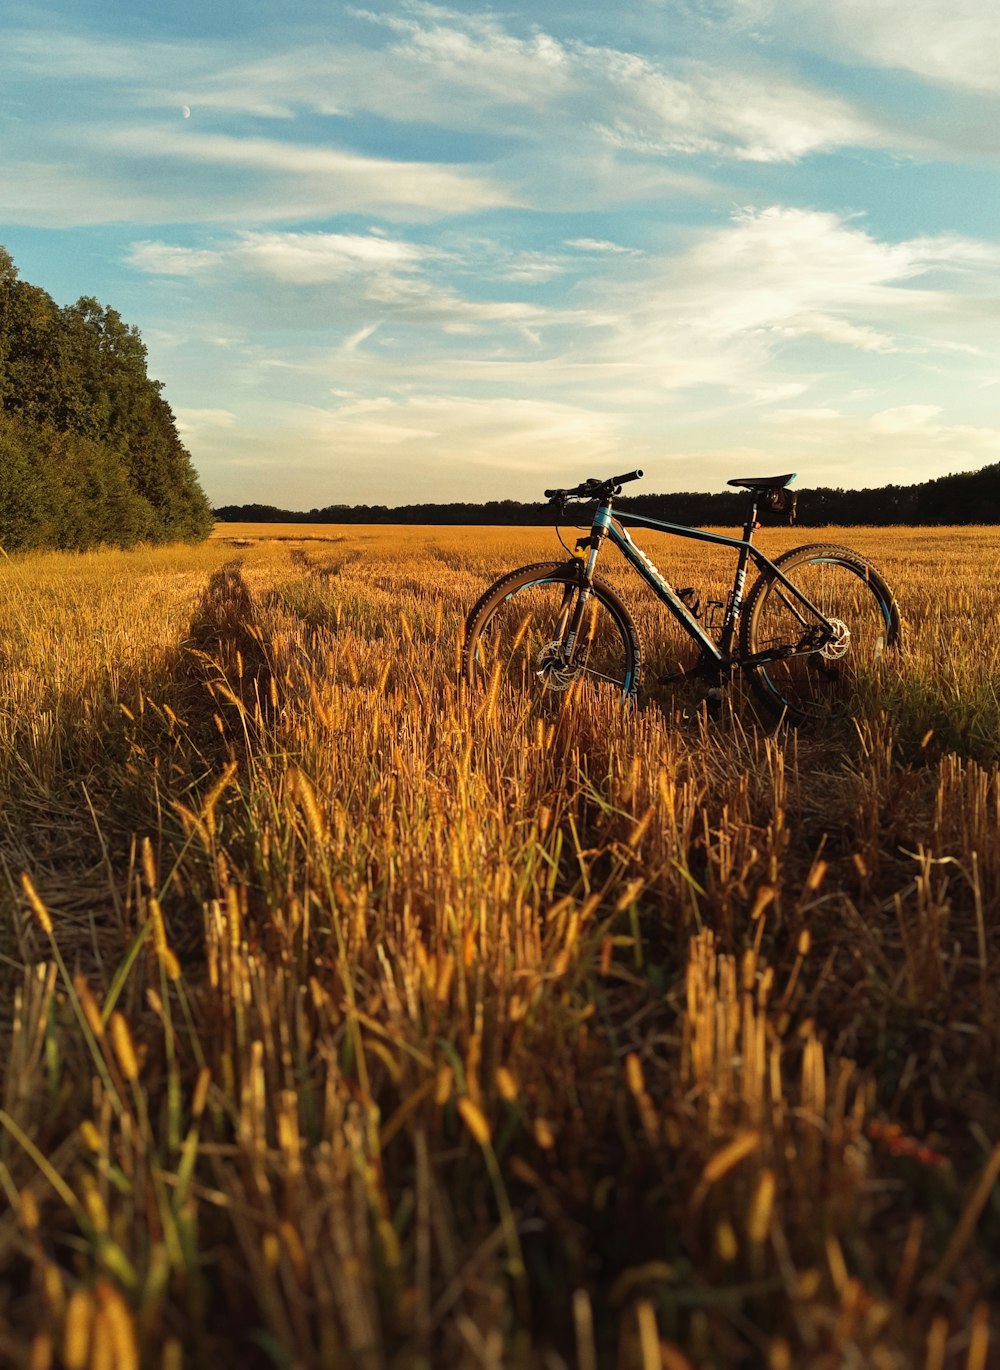 black bicycle on brown grass field under white clouds and blue sky during daytime